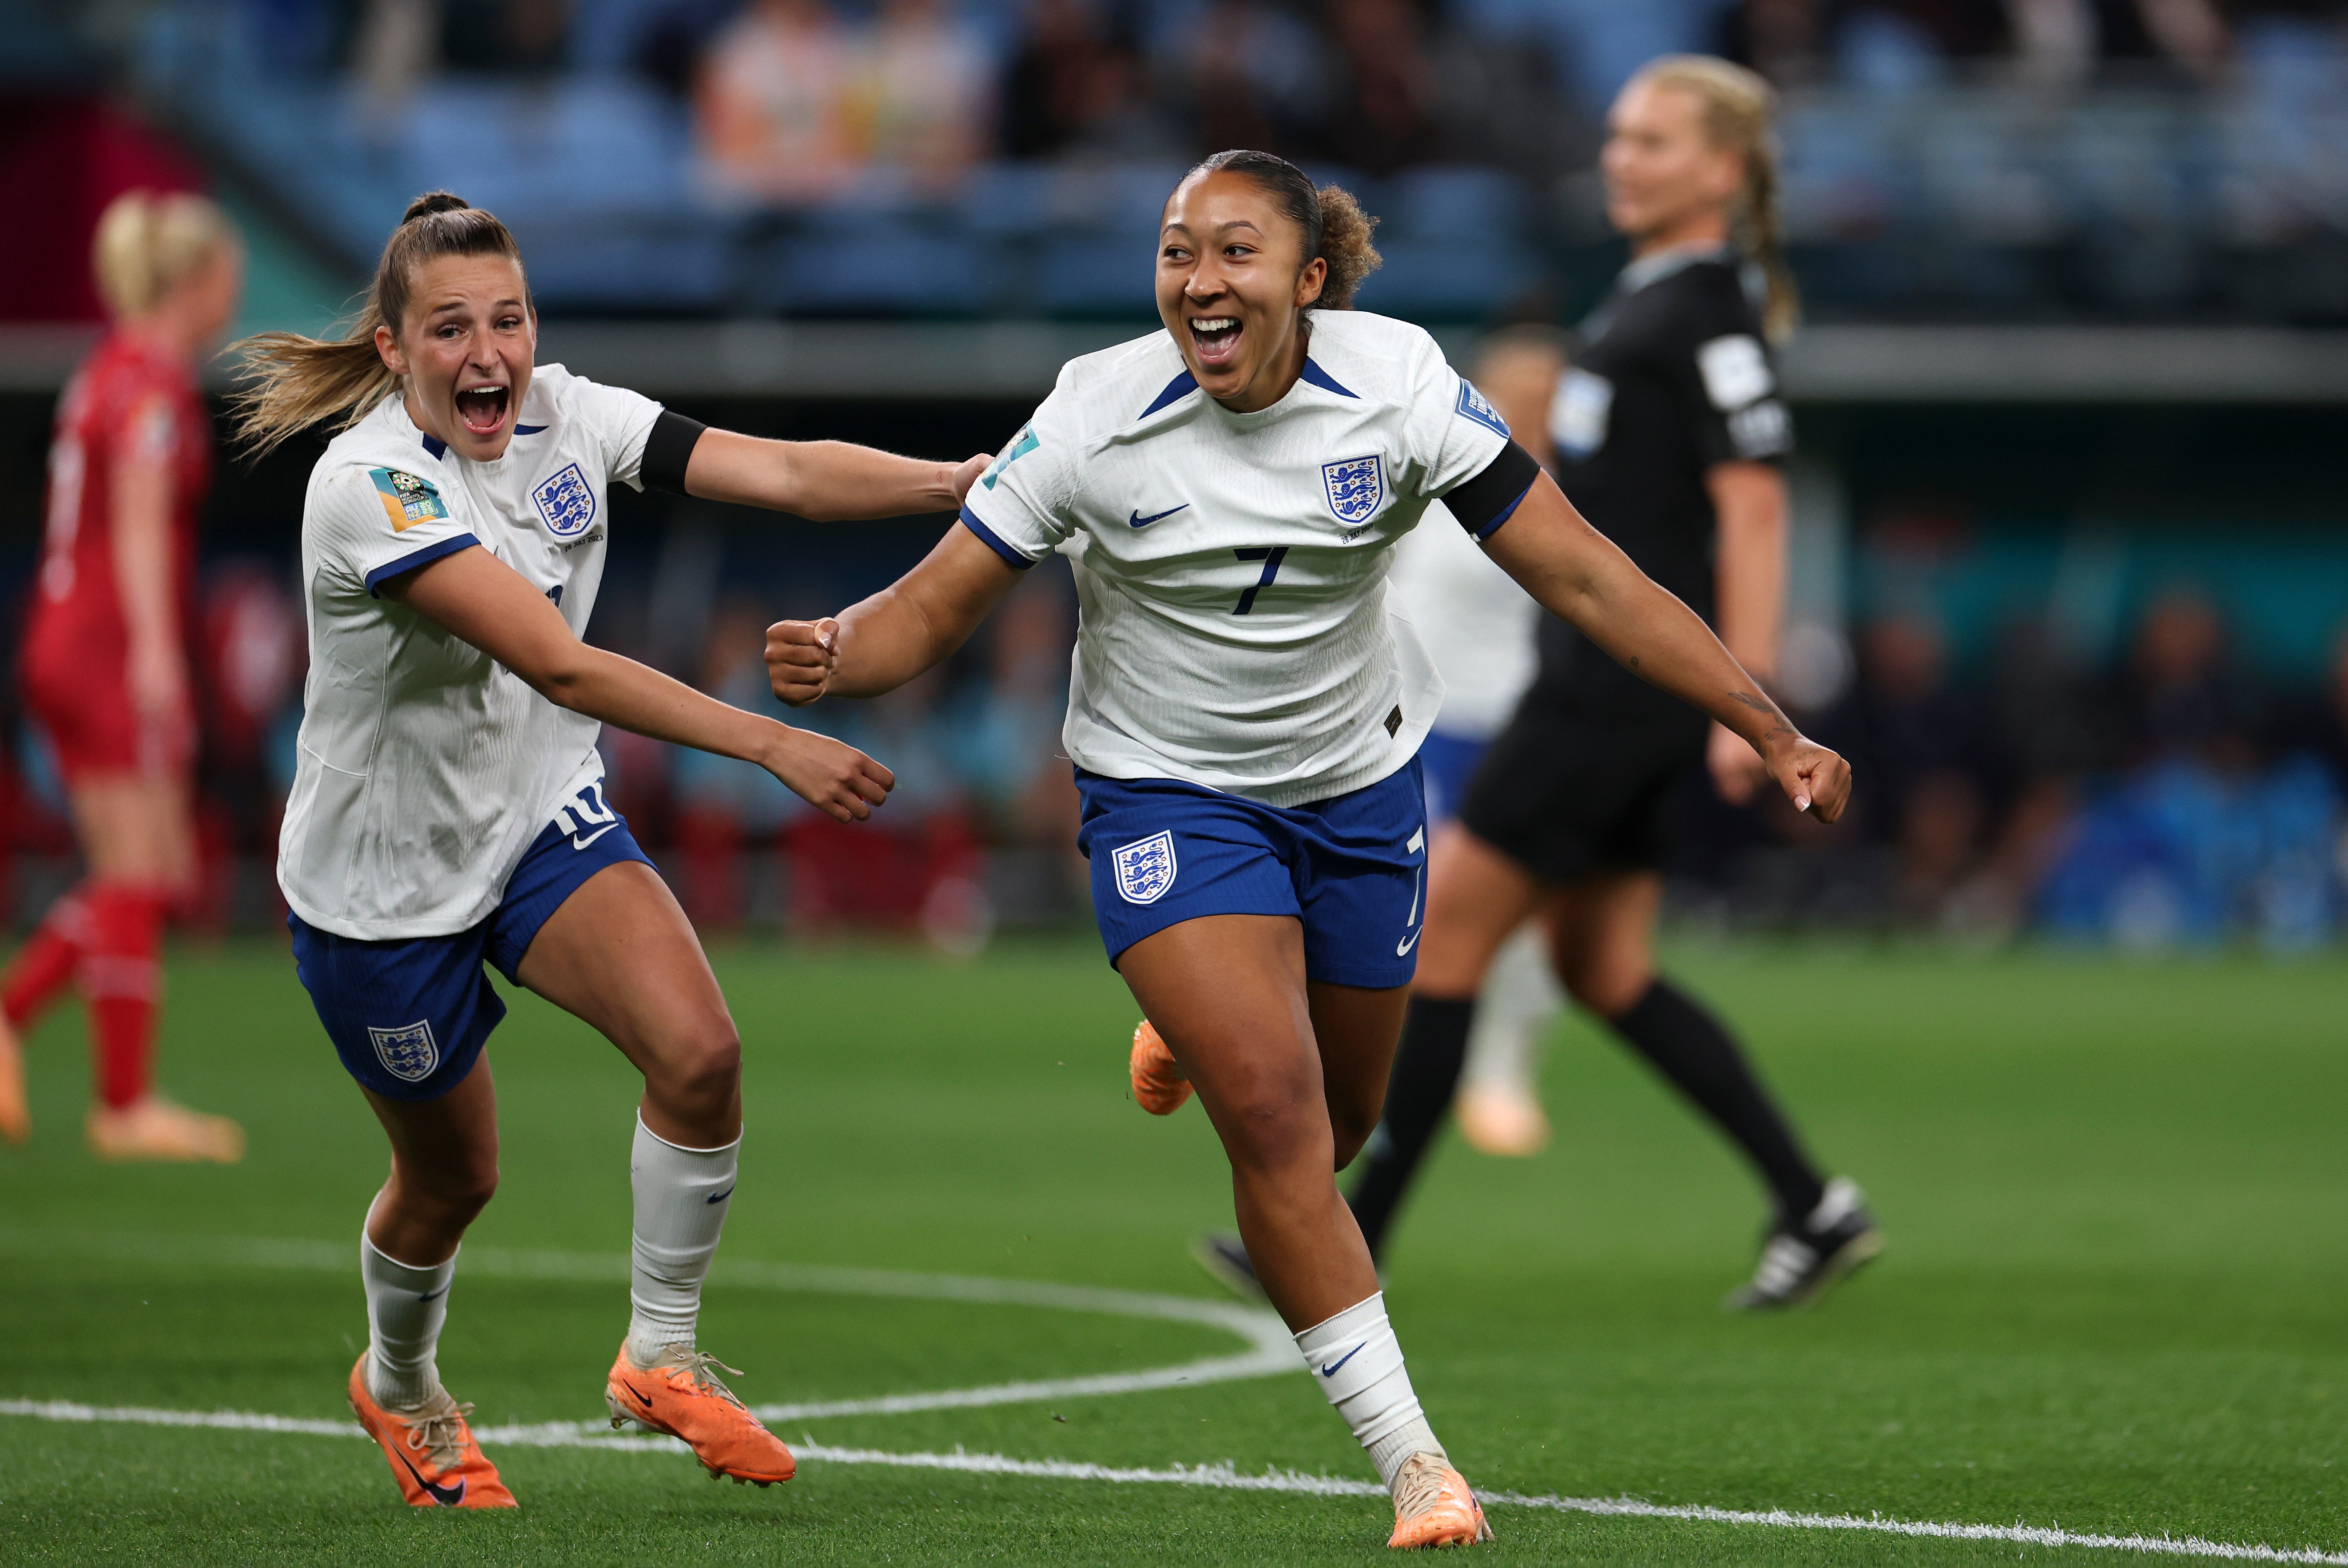 Women’s football will not go back into its box